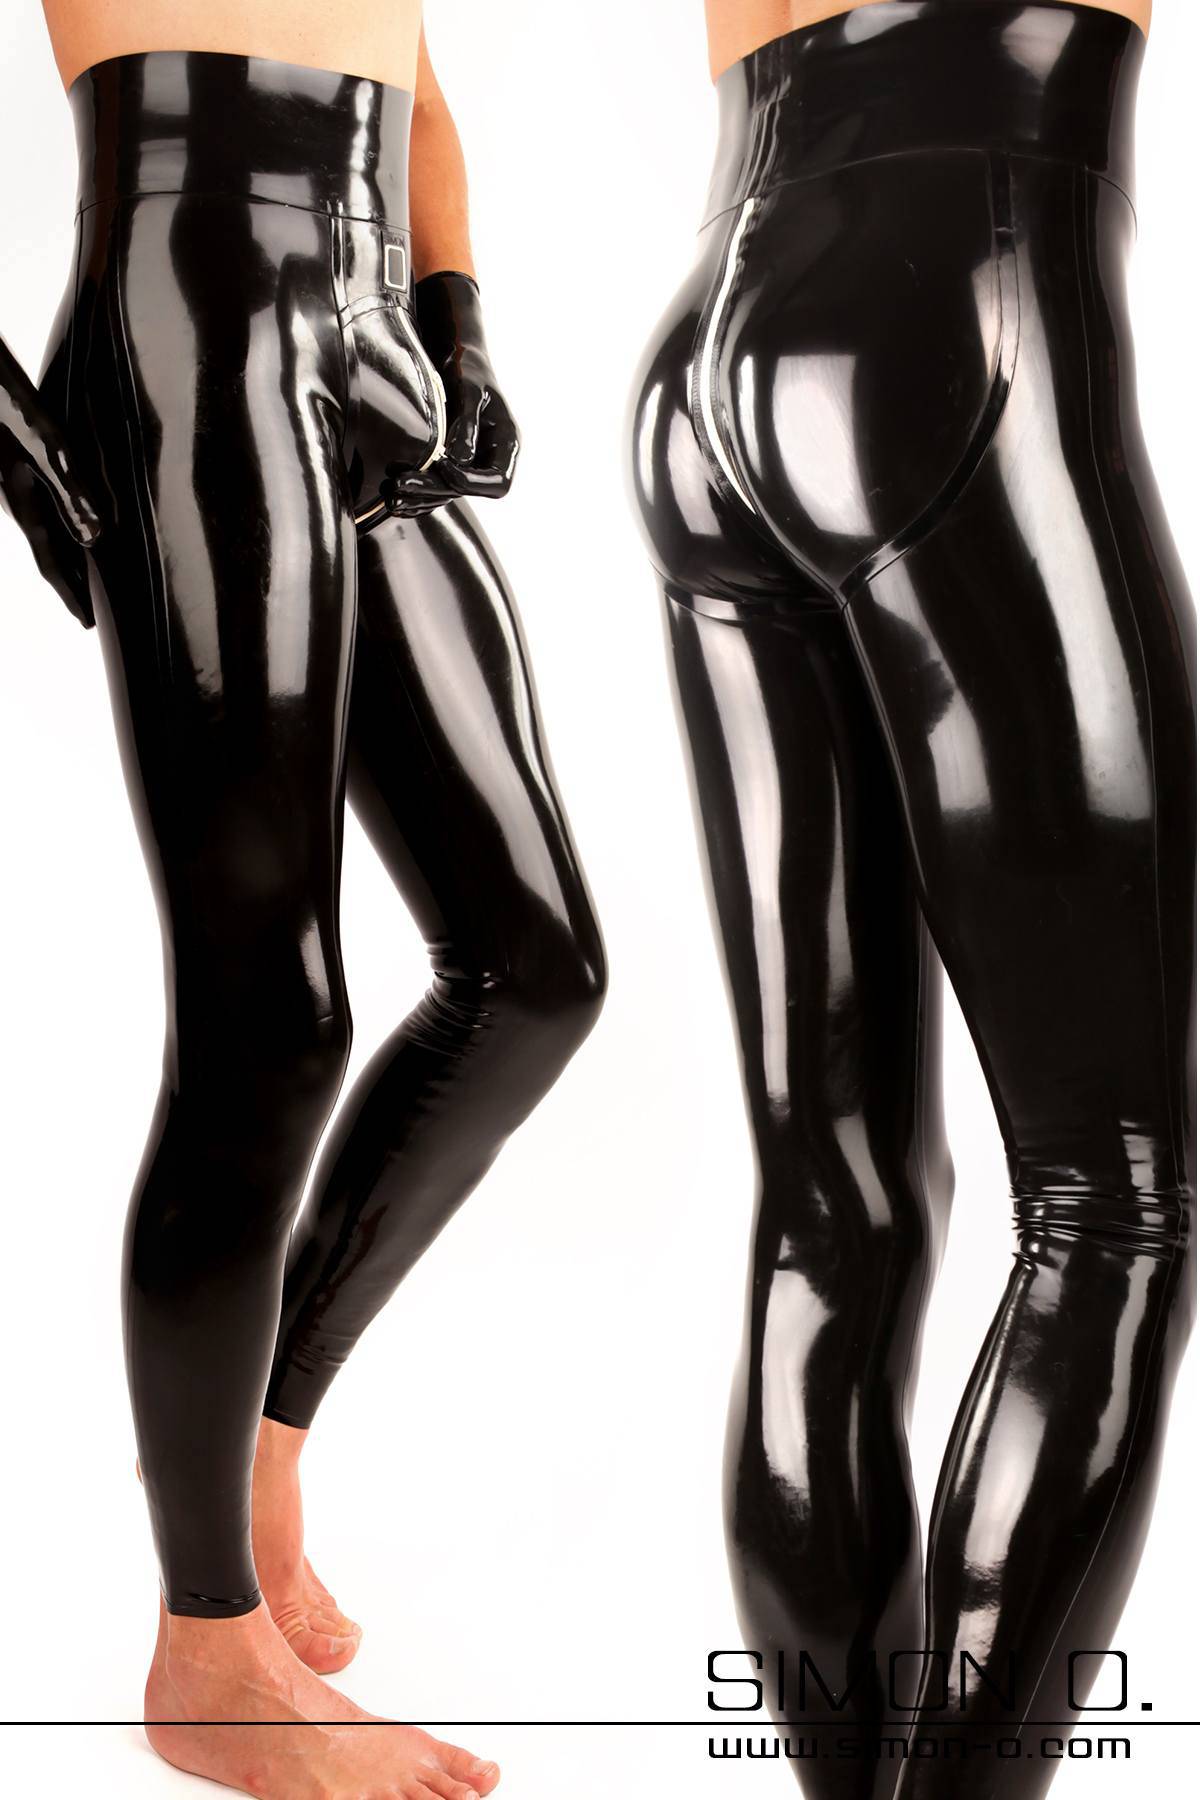 Suitop special women's rubber pants latex trousers with side pockets in  black color